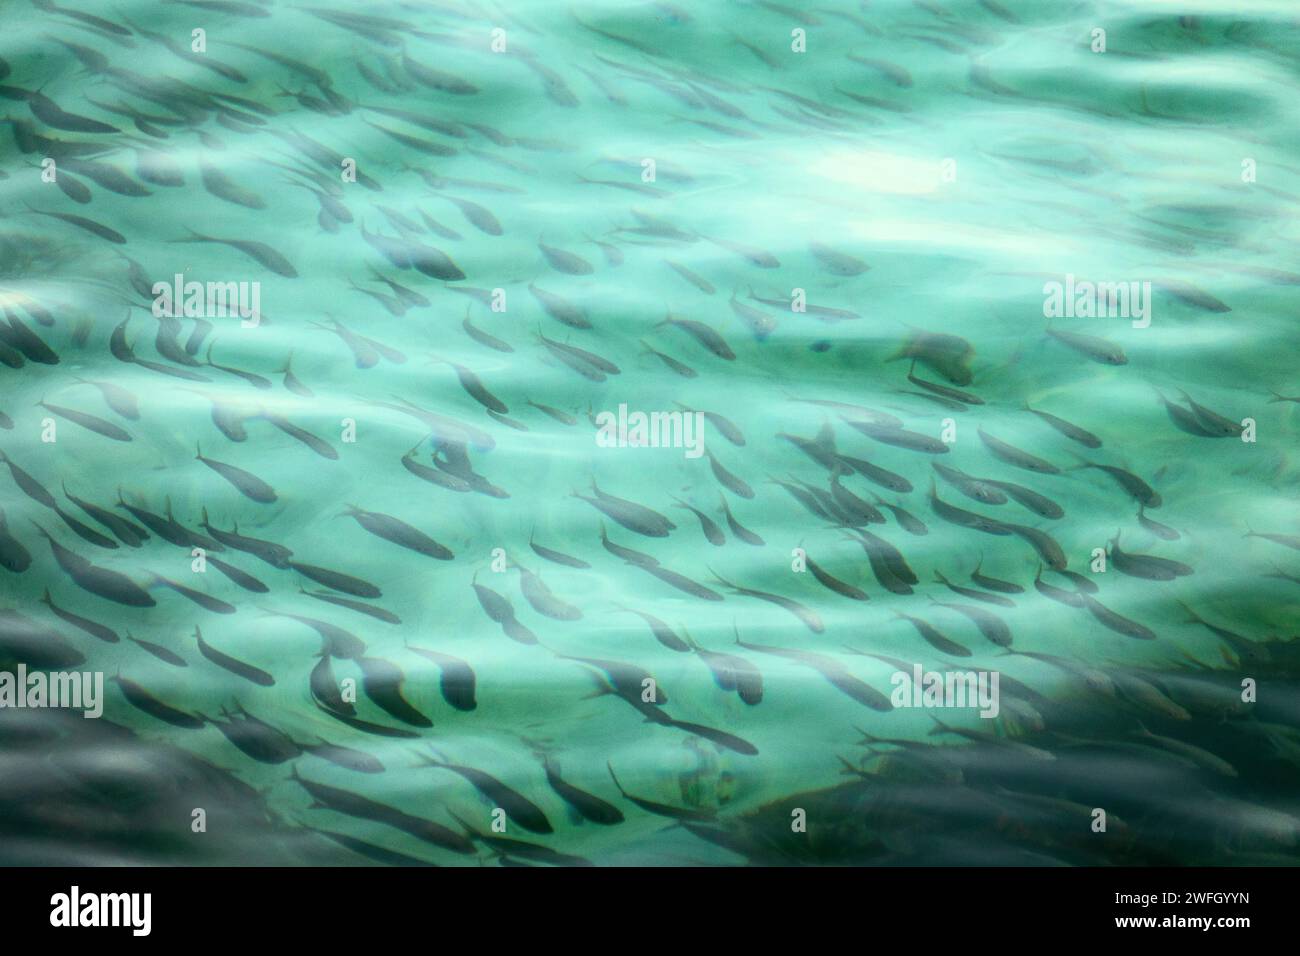 A flock of fish (fish school) under the rippling surface of the sea Stock Photo